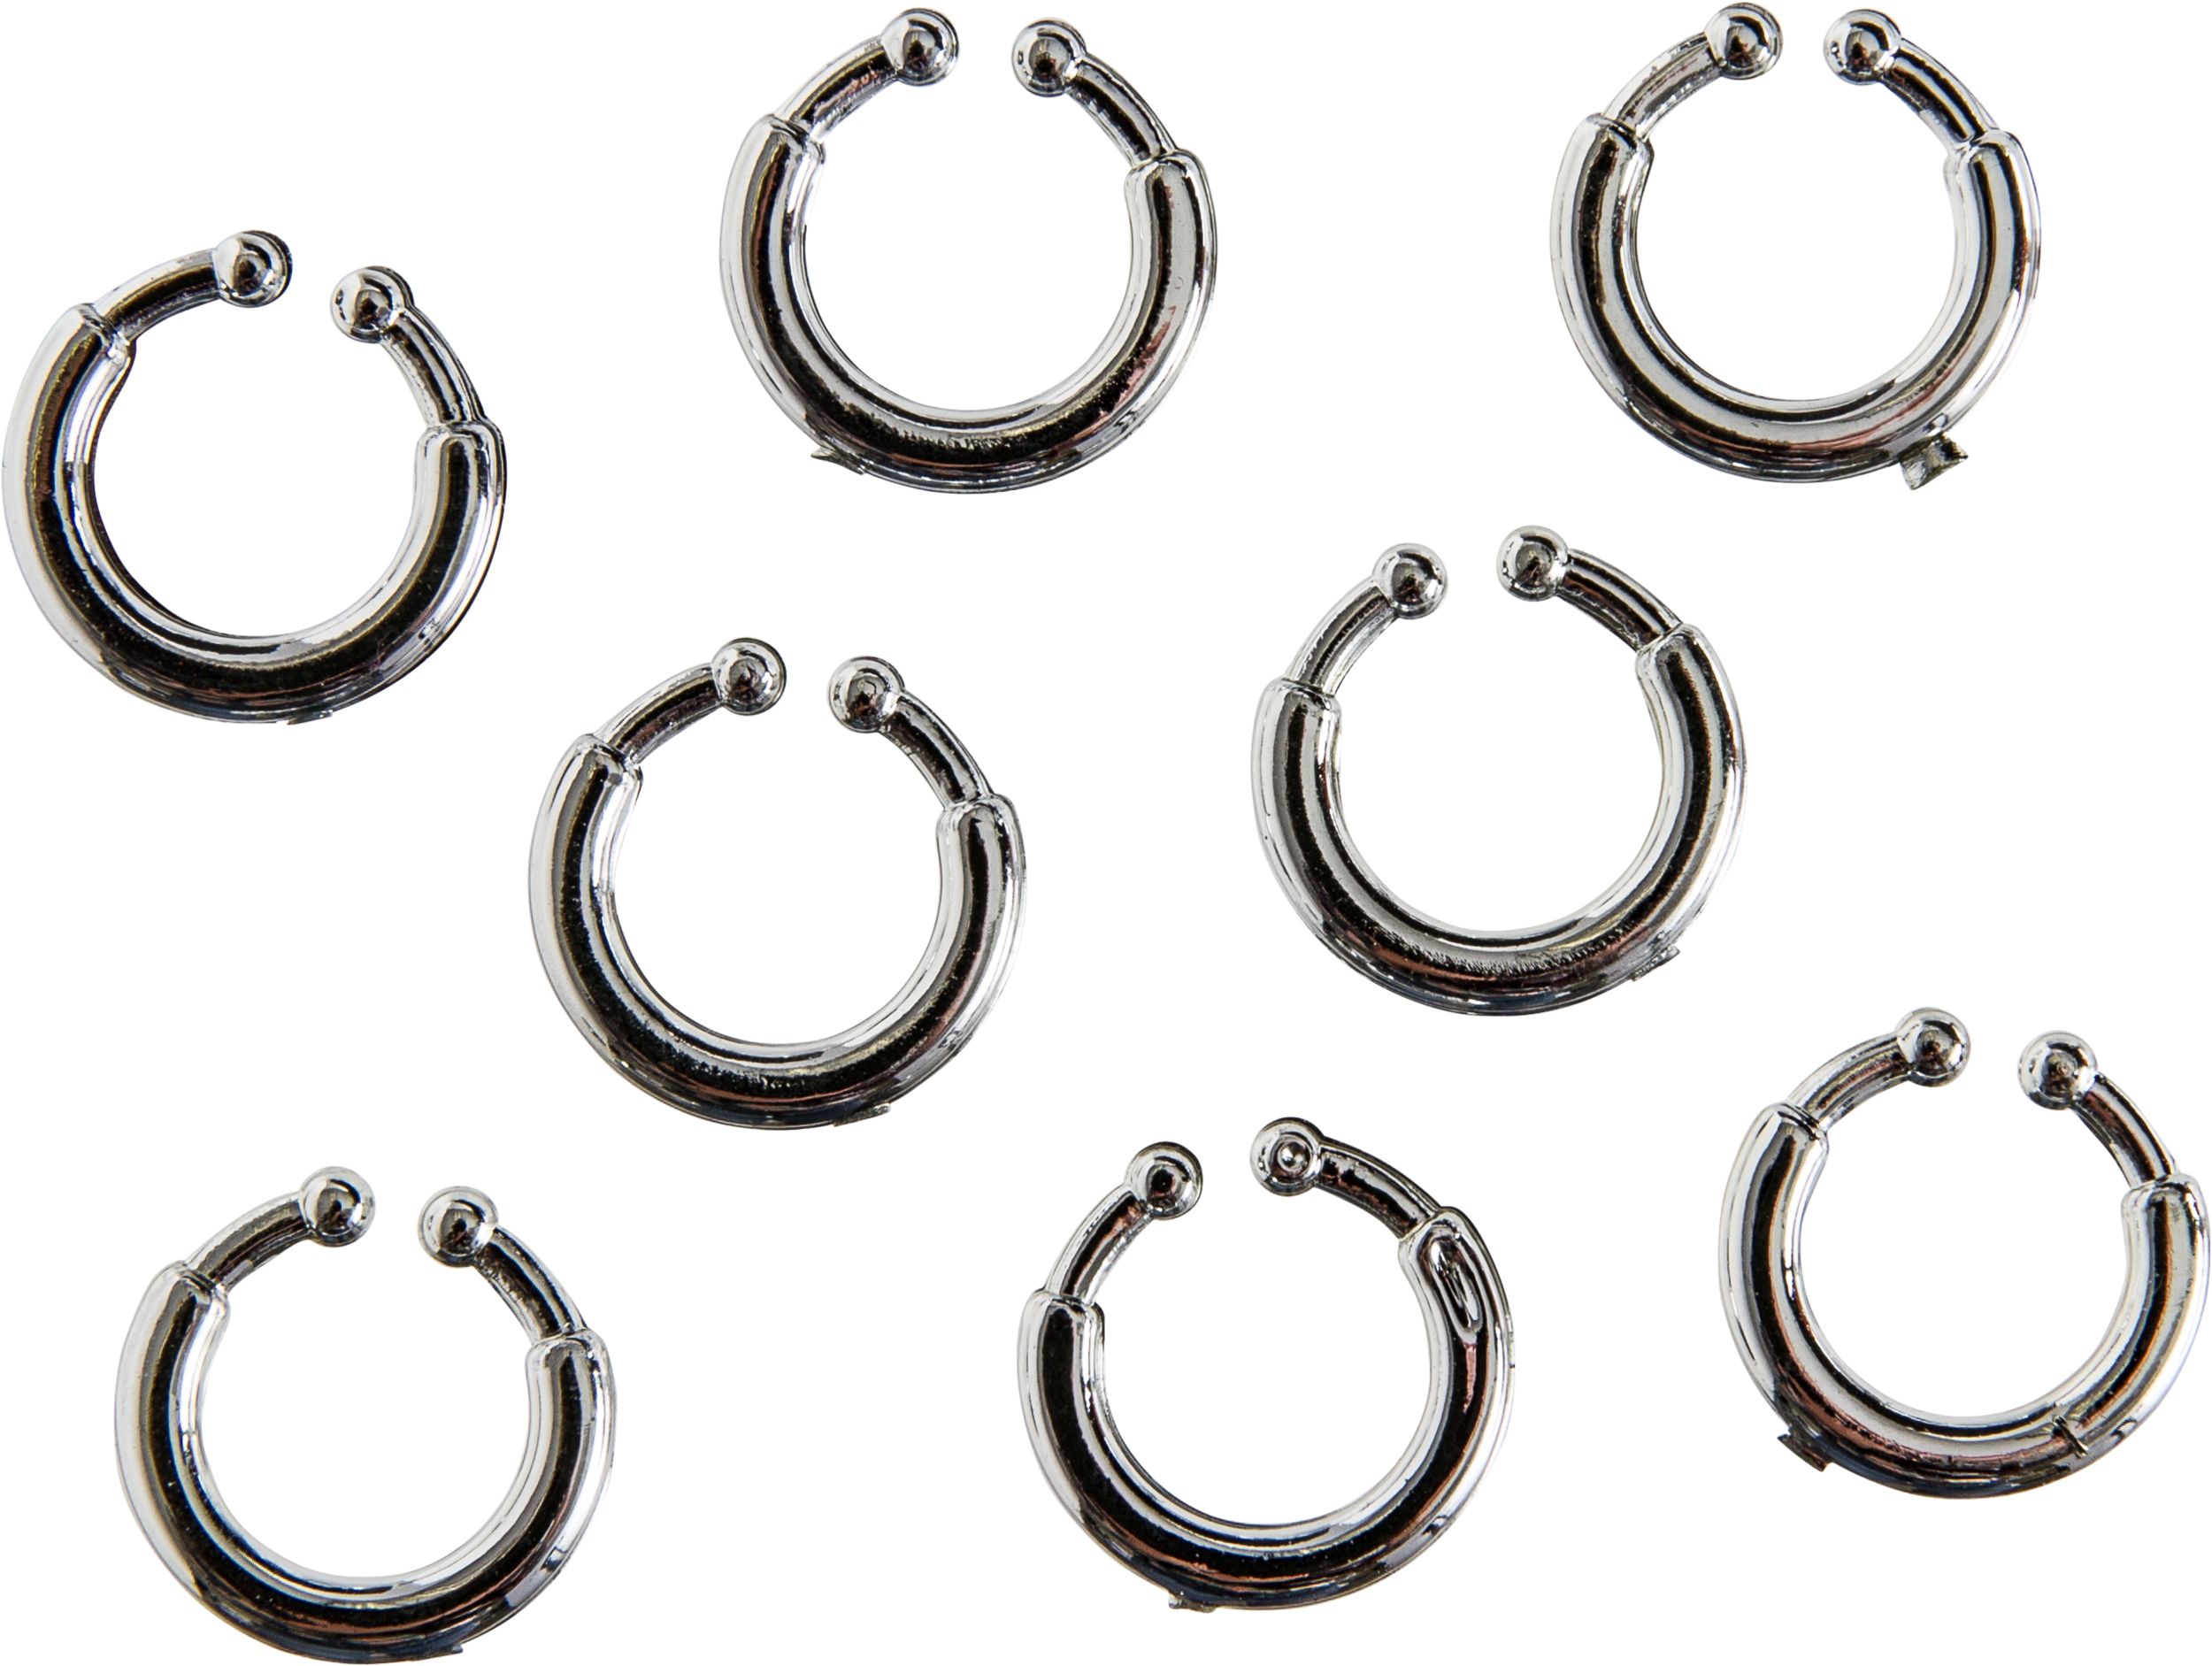 No-Piercing Clip-On Ear, Lip, Eyebrow Jewelry Set, Silver, One Size, 8-pk,  Wearable Costume Accessories for Halloween